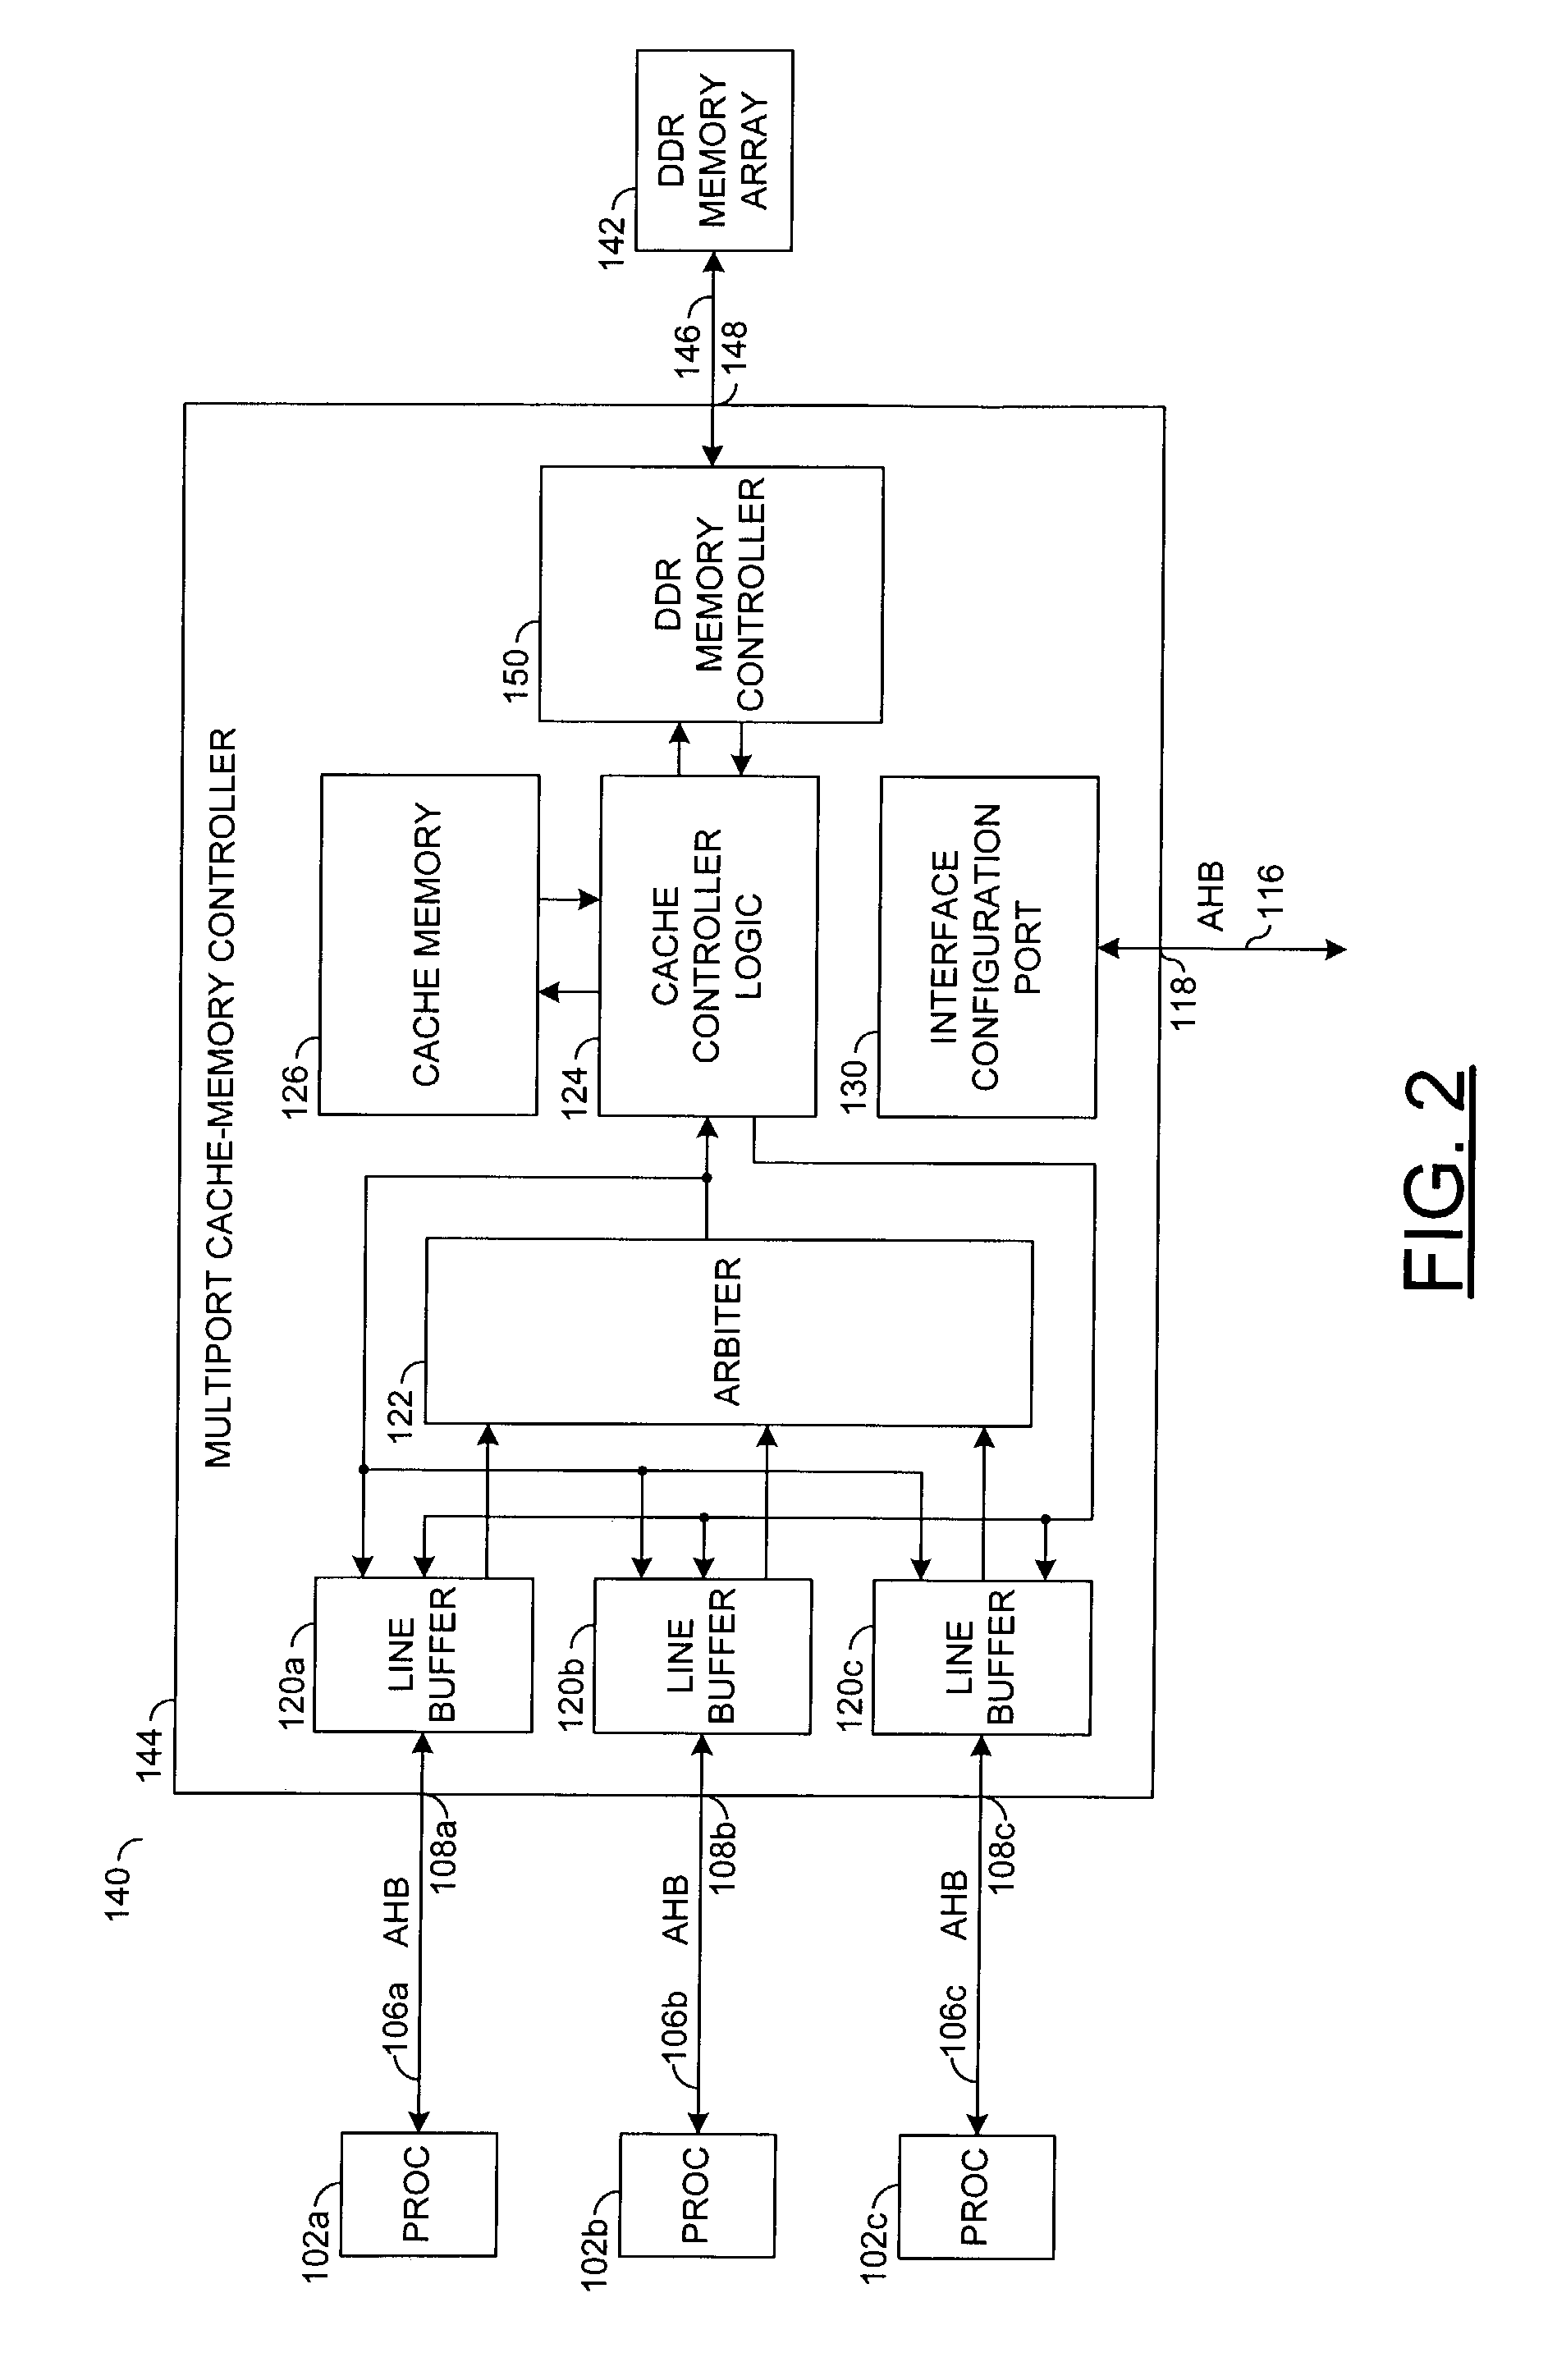 Method for use of ternary CAM to implement software programmable cache policies